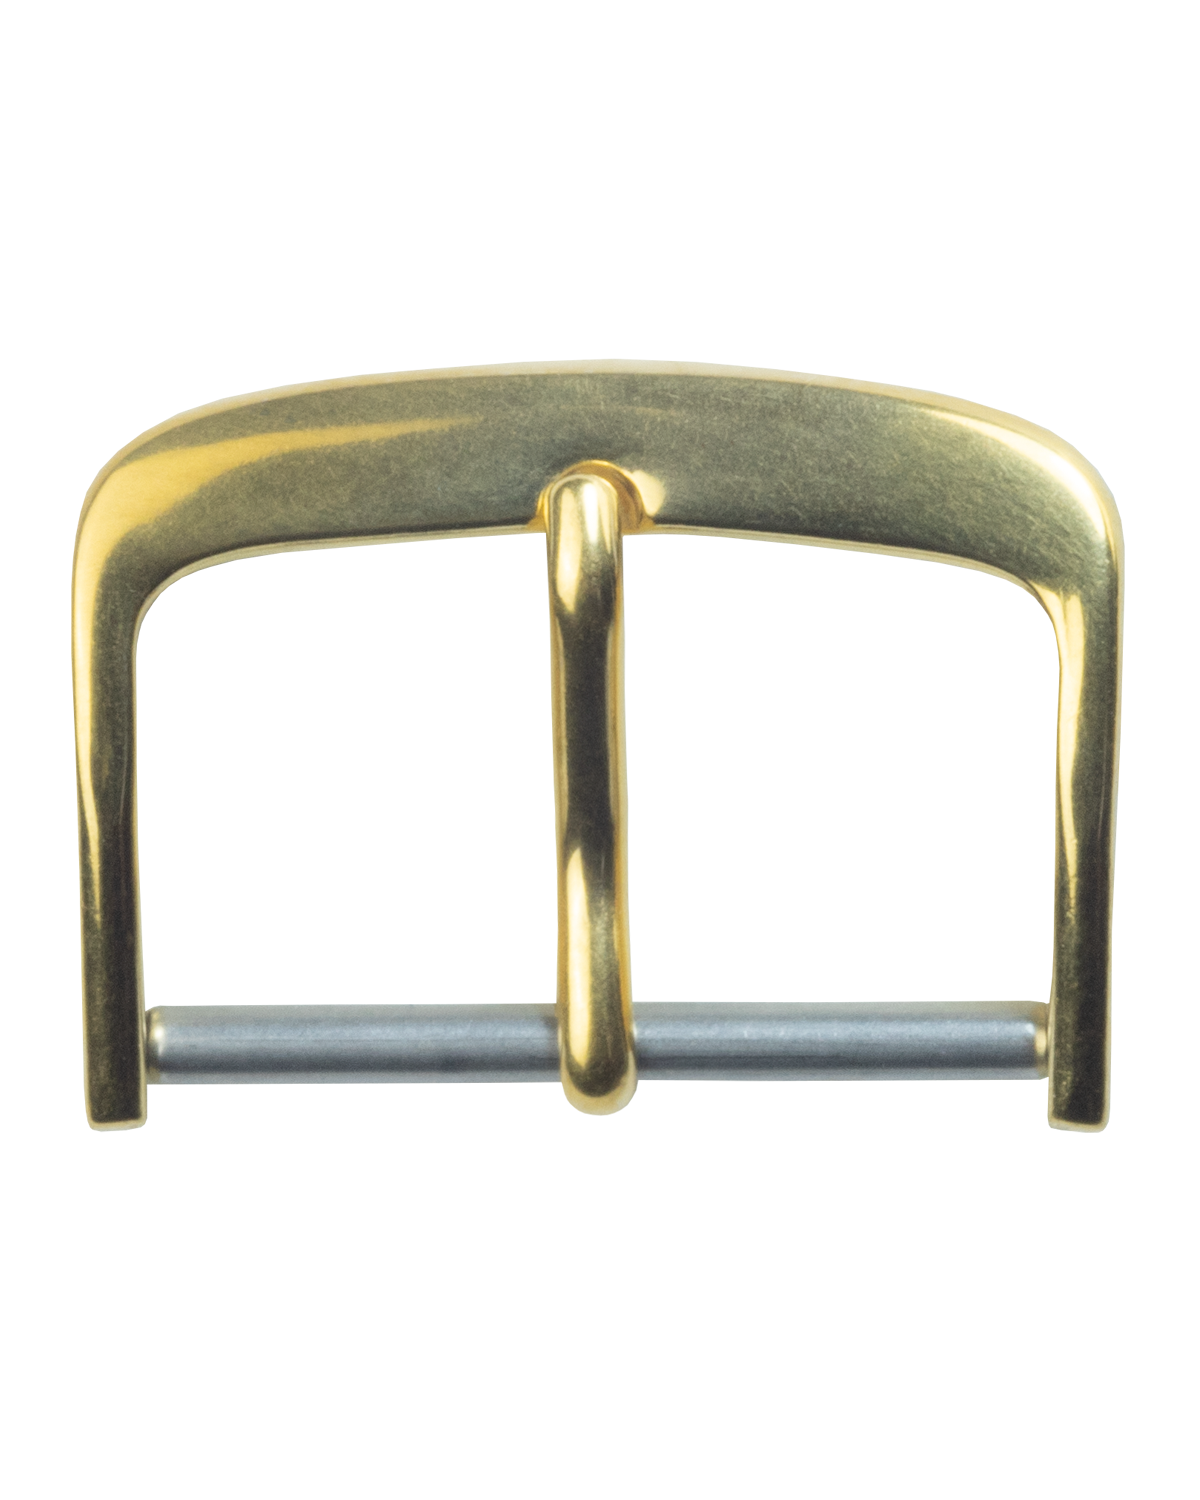 Eulit pin buckle, gold plated